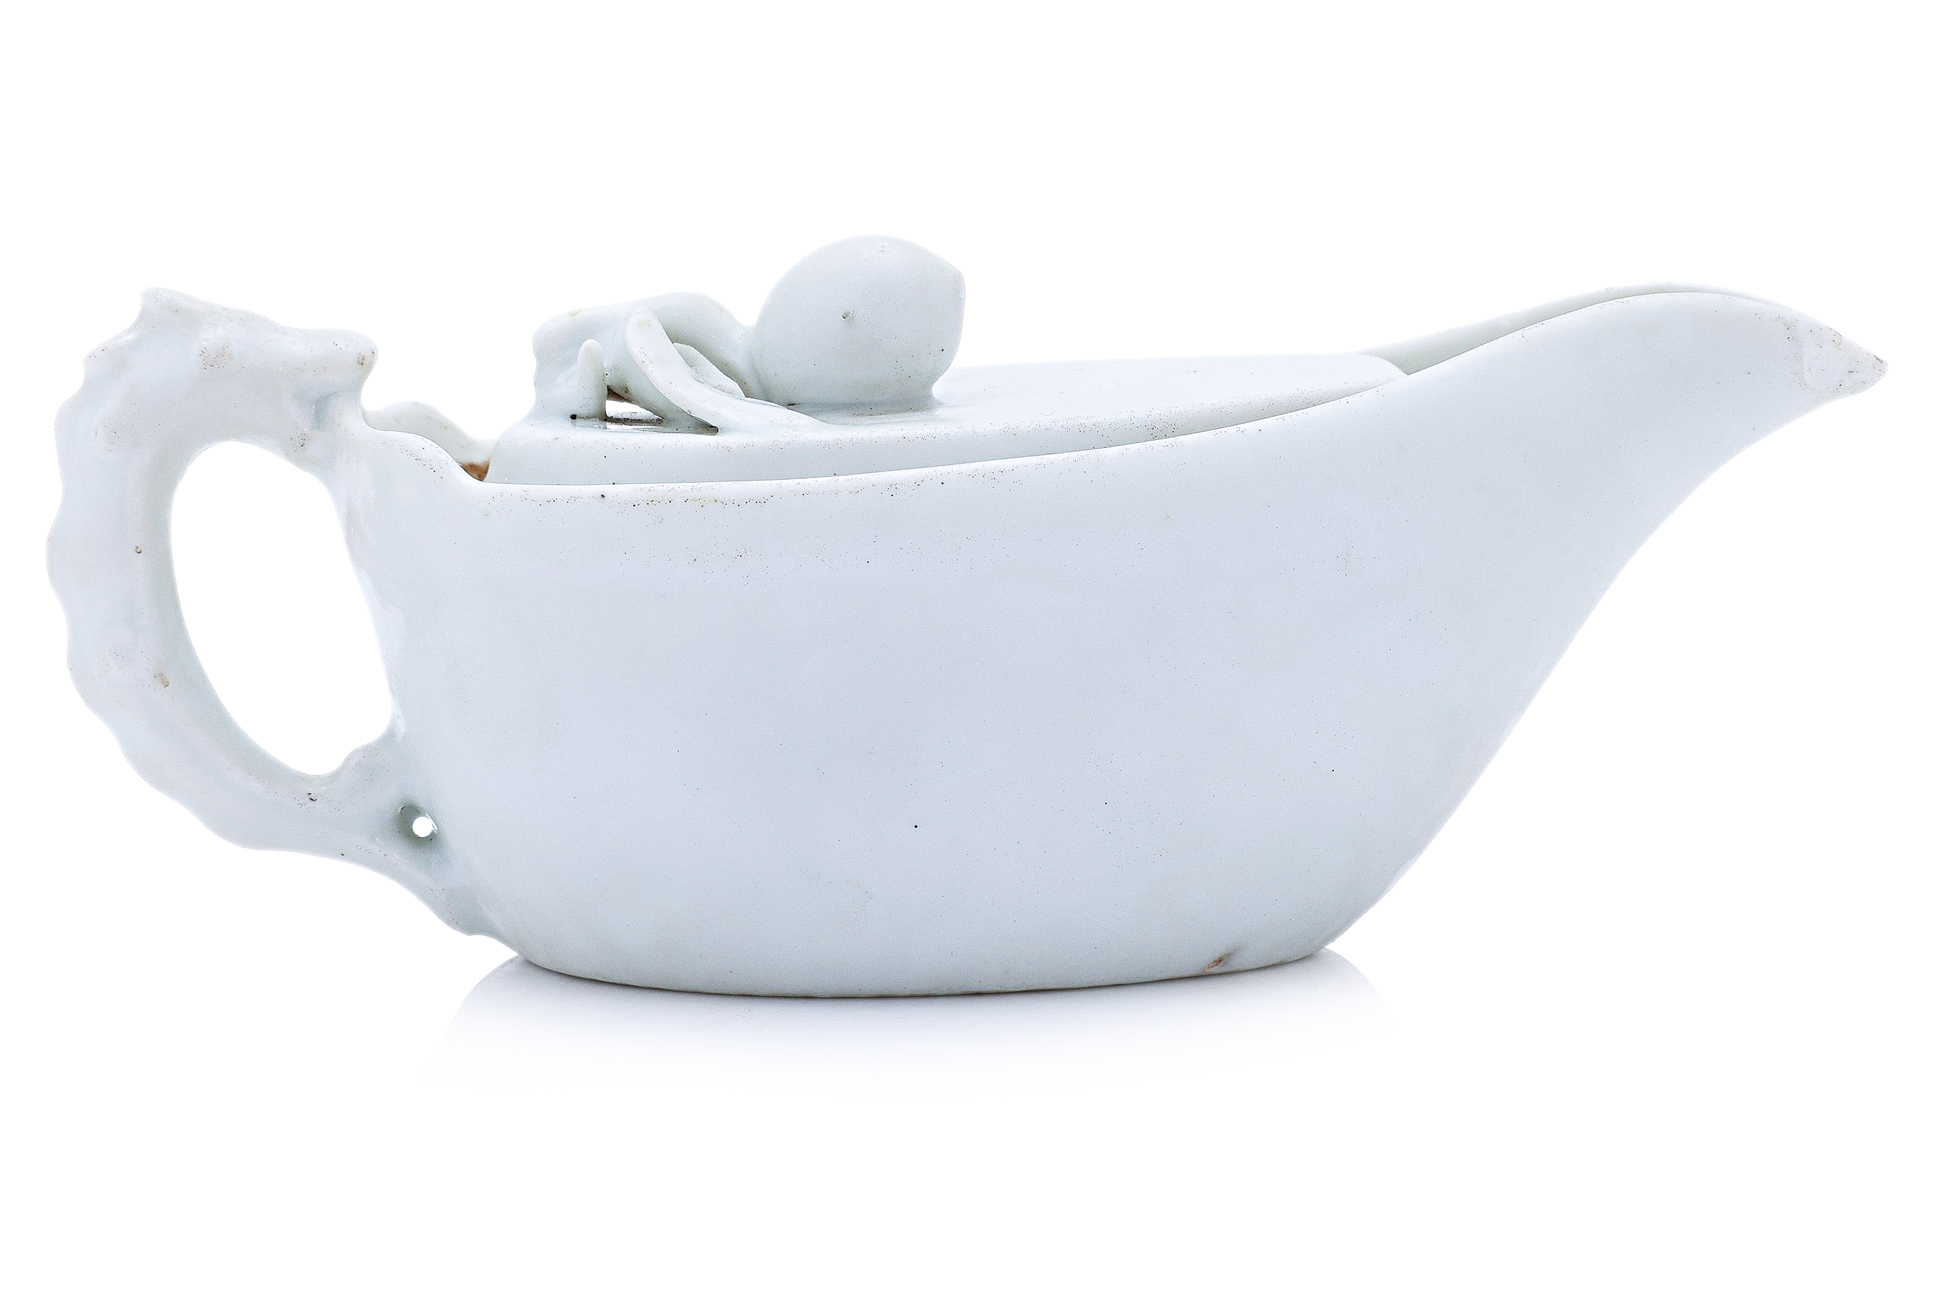 A DEHUA BLANC DE CHINE TEAPOT OR POURING VESSEL AND COVER - Image 2 of 13